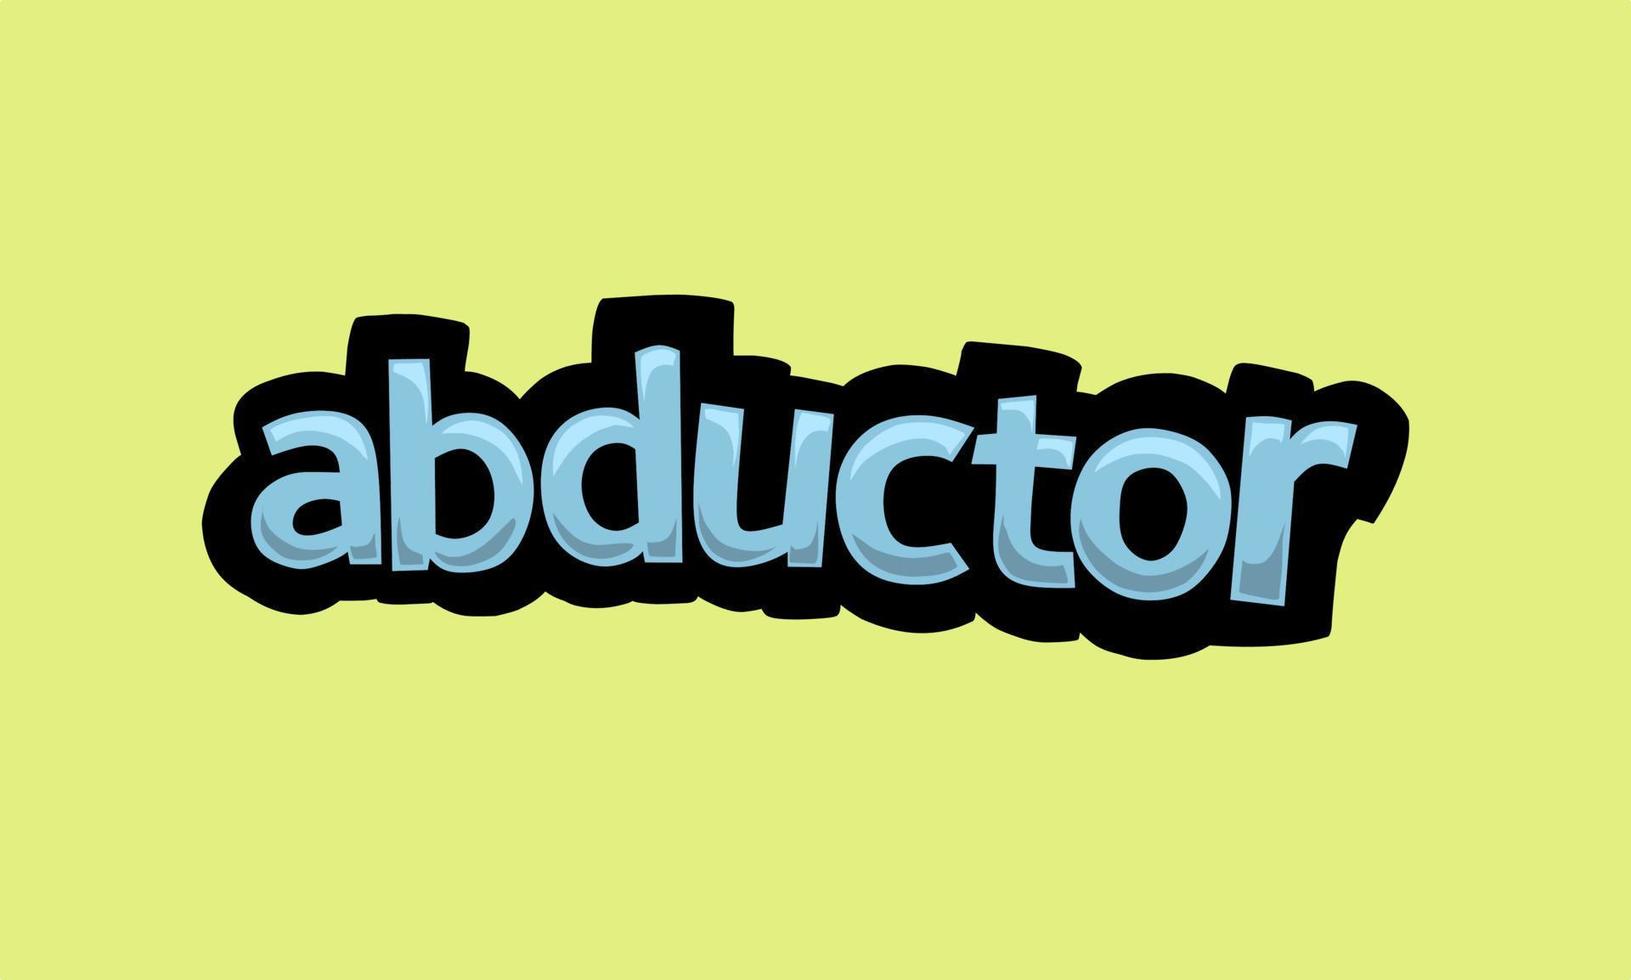 ABDUCTOR writing vector design on a yellow background